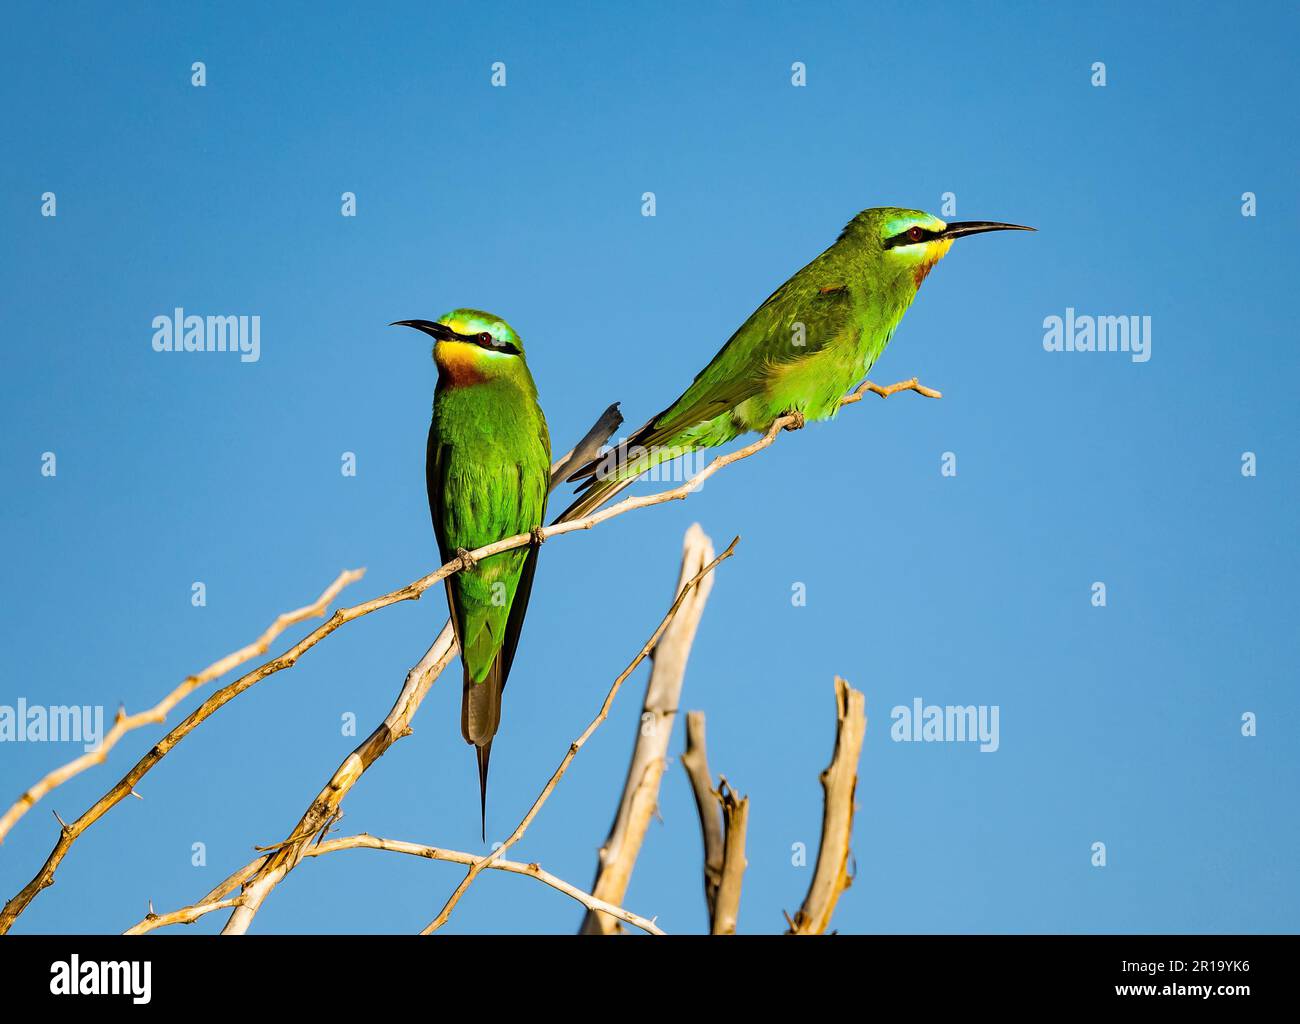 Two Blue-cheeked Bee-eaters (Merops persicus) perched on a branch. Kenya, Africa. Stock Photo